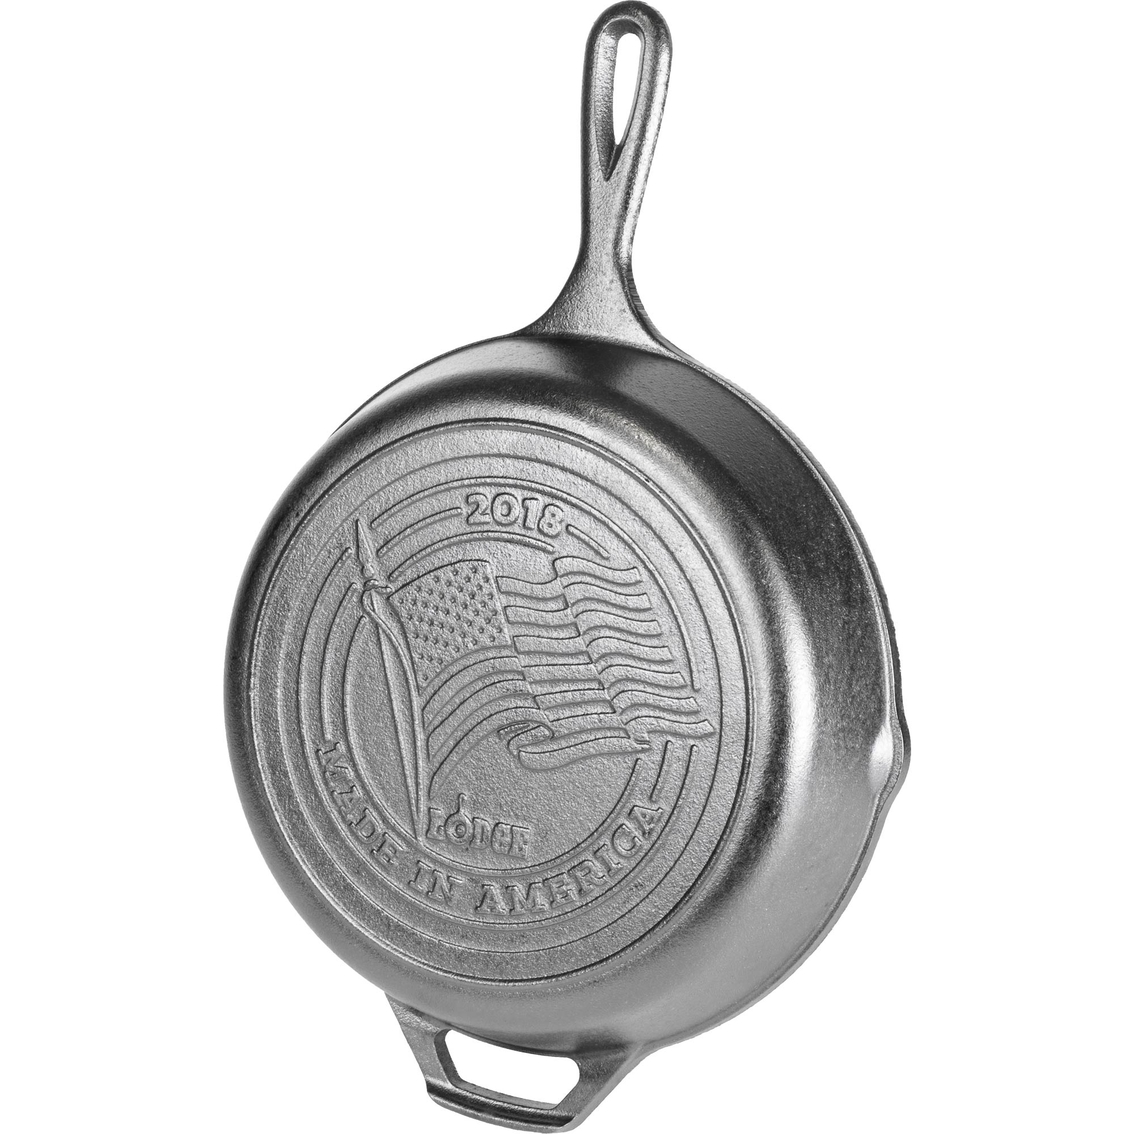 Lodge Made in America Series 2018 Cast Iron Skillet, American Flag 10.25  Inch S